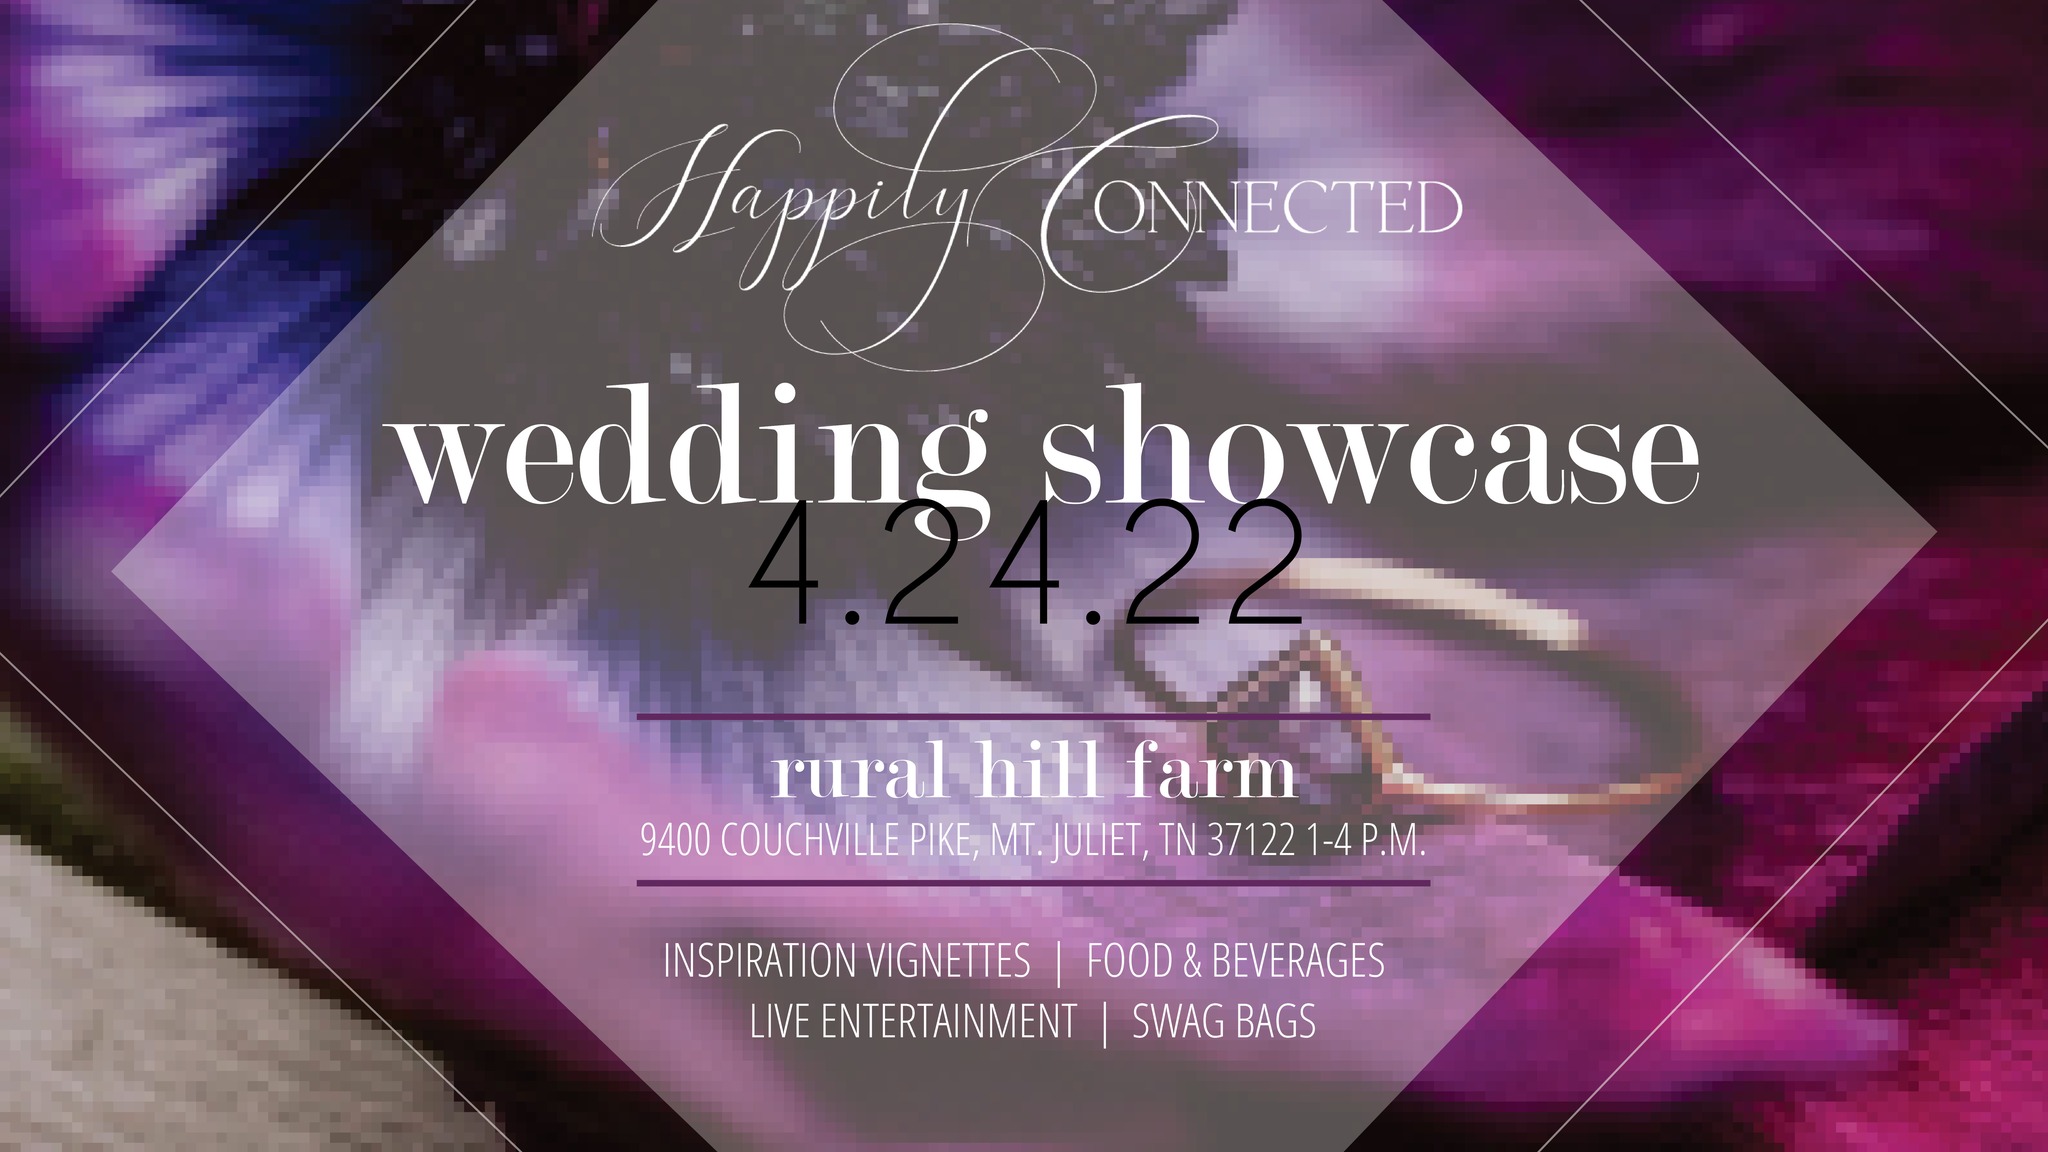 Happily Connected Wedding Showcase